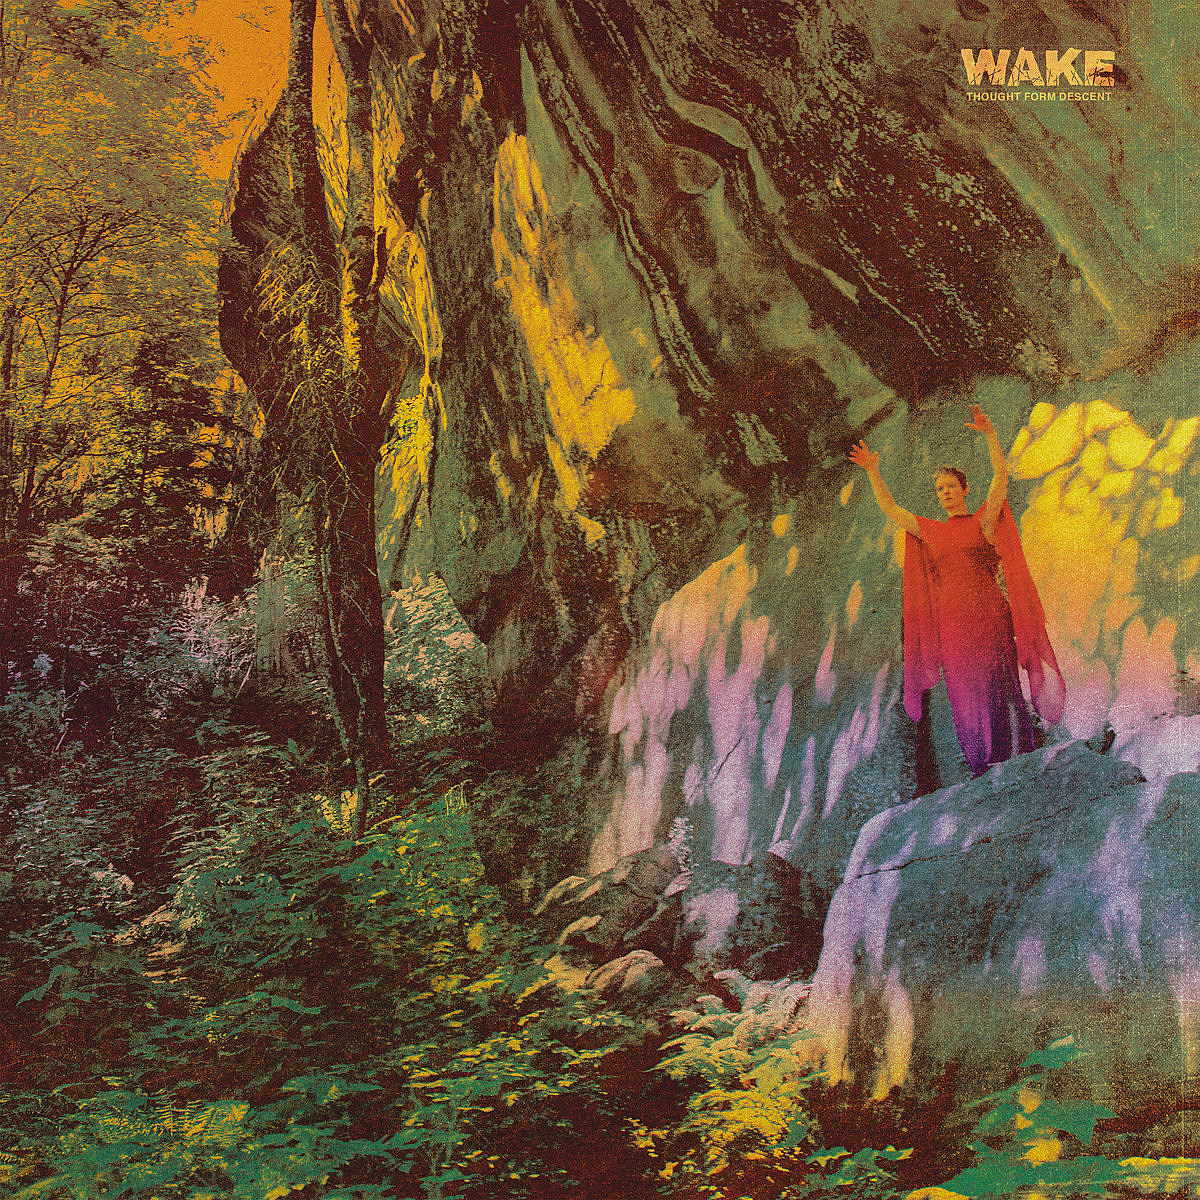 Wake Thought Form Descent